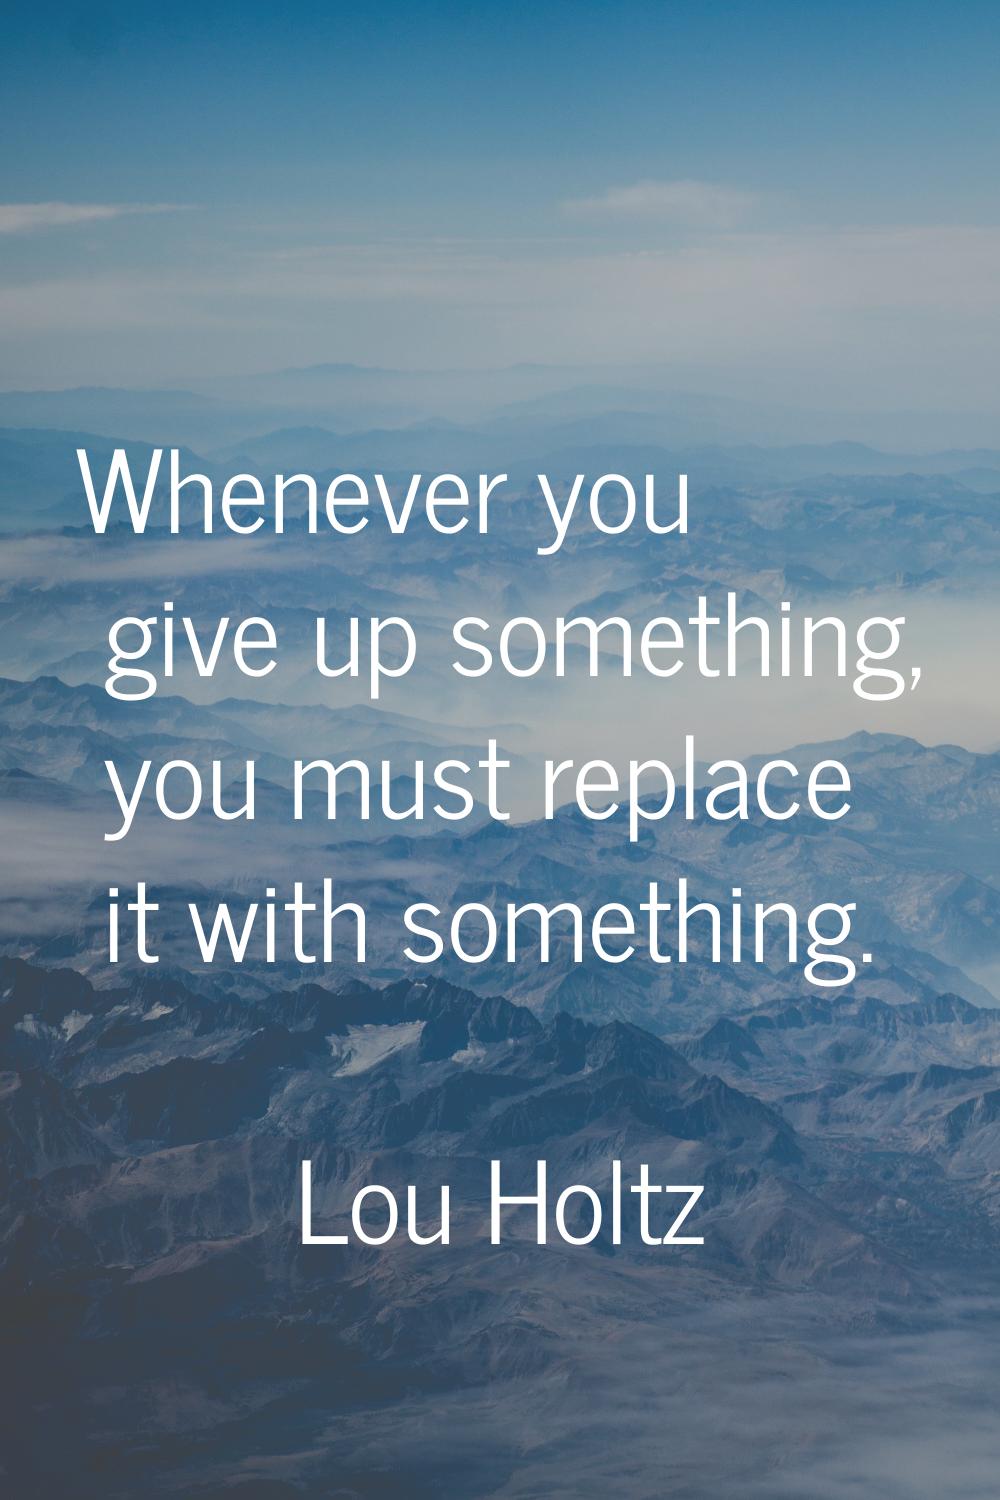 Whenever you give up something, you must replace it with something.